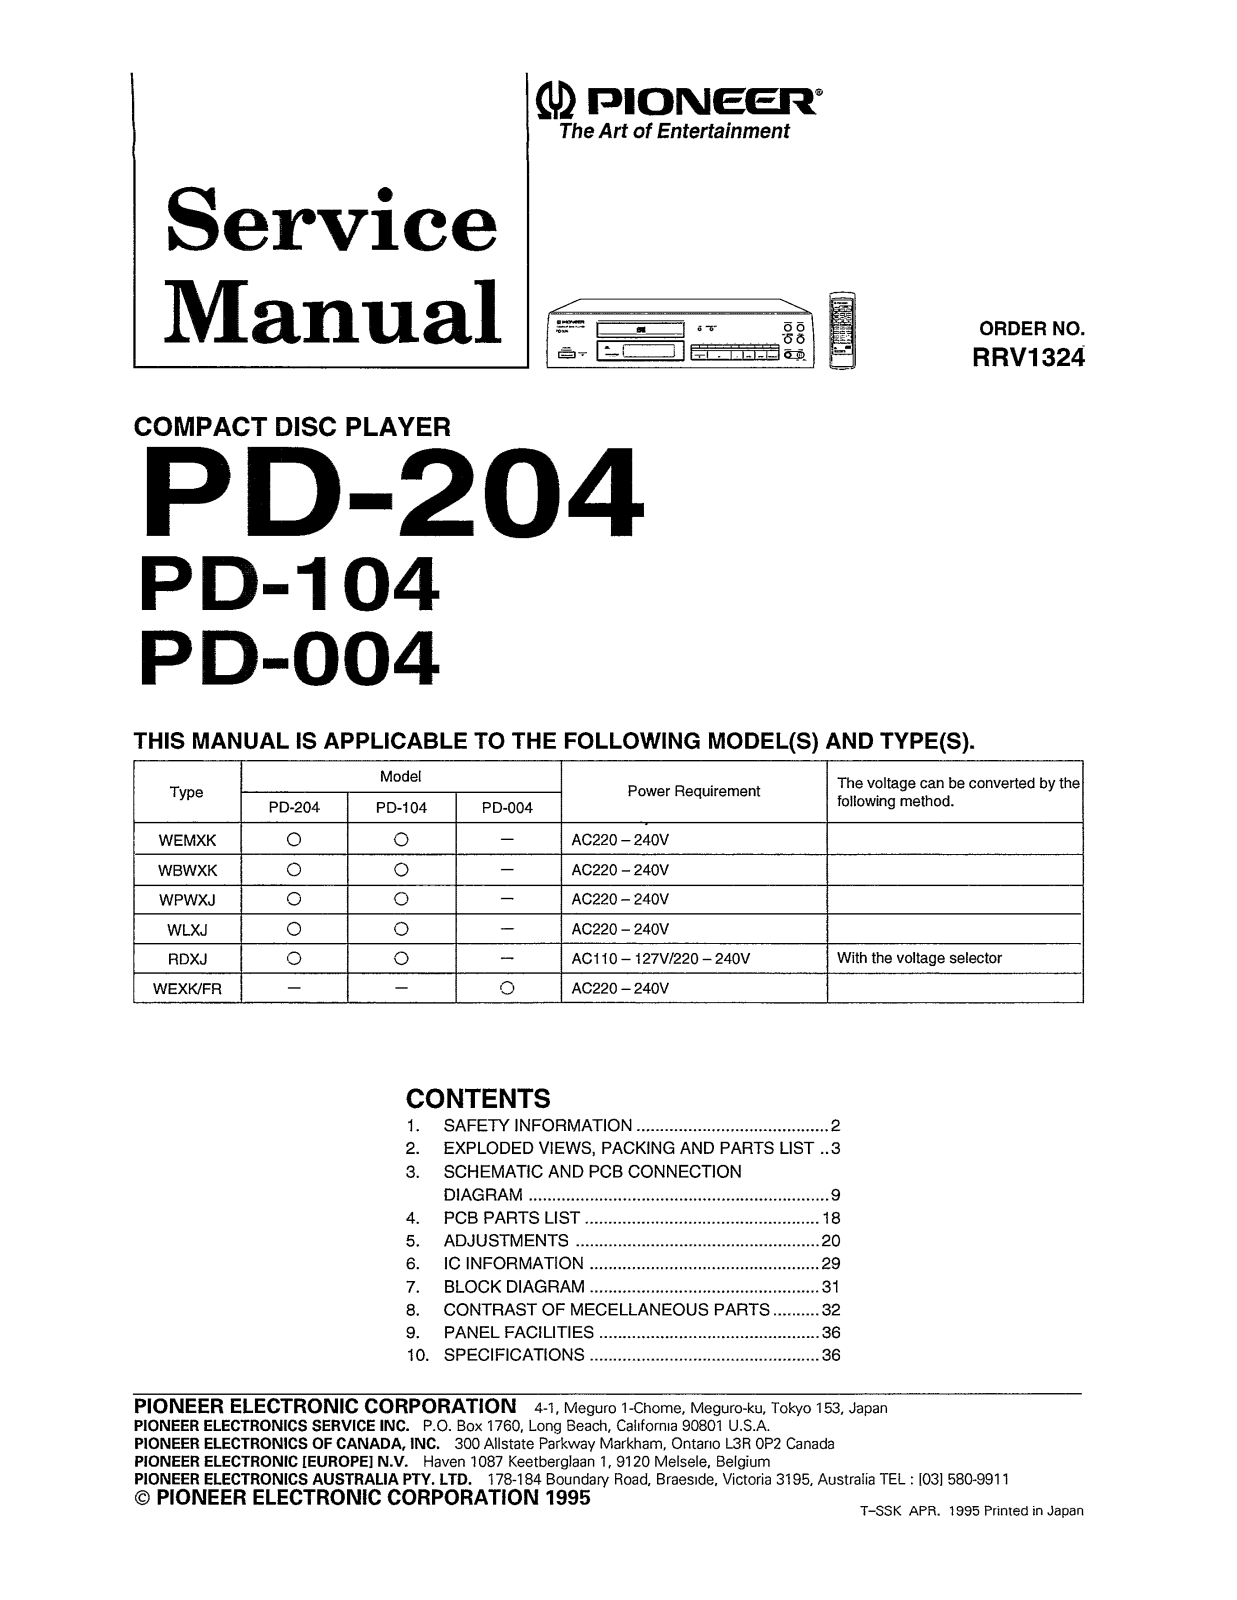 Pioneer PD-204, PD-104 Service manual